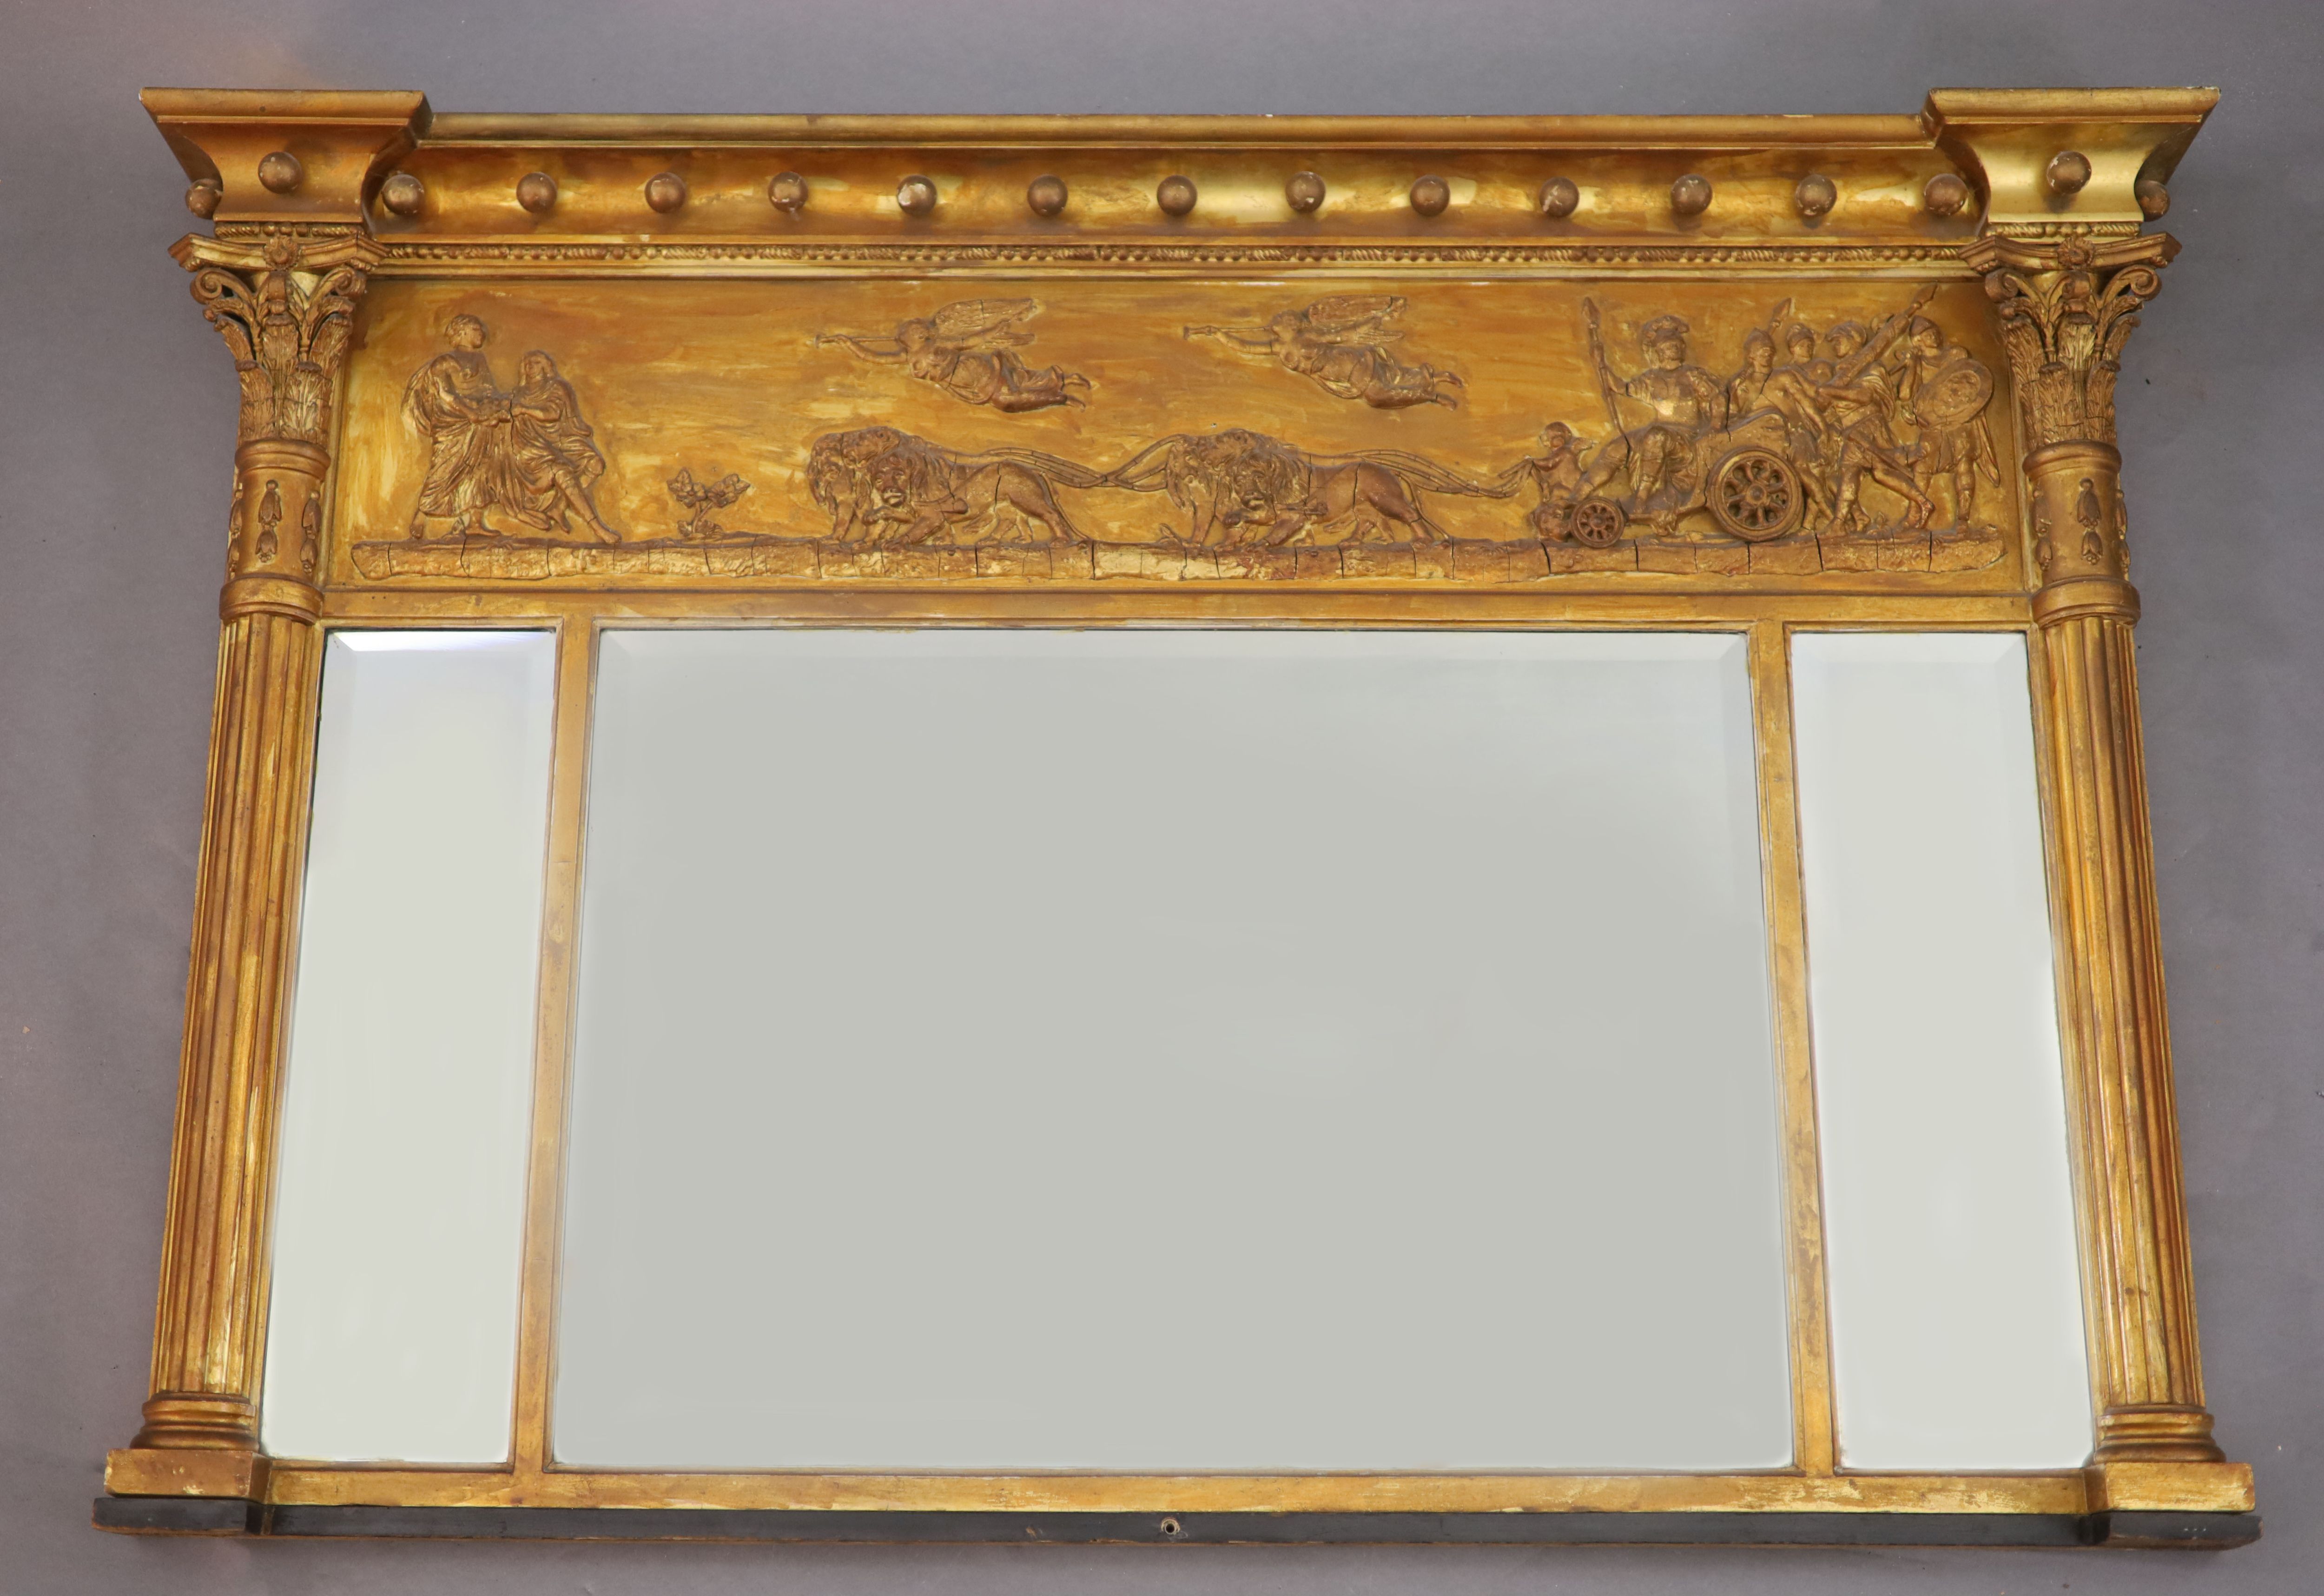 A Regency style giltwood and composite overmantel mirror, late 19th century, 4ft 2in. x 2ft 10in.